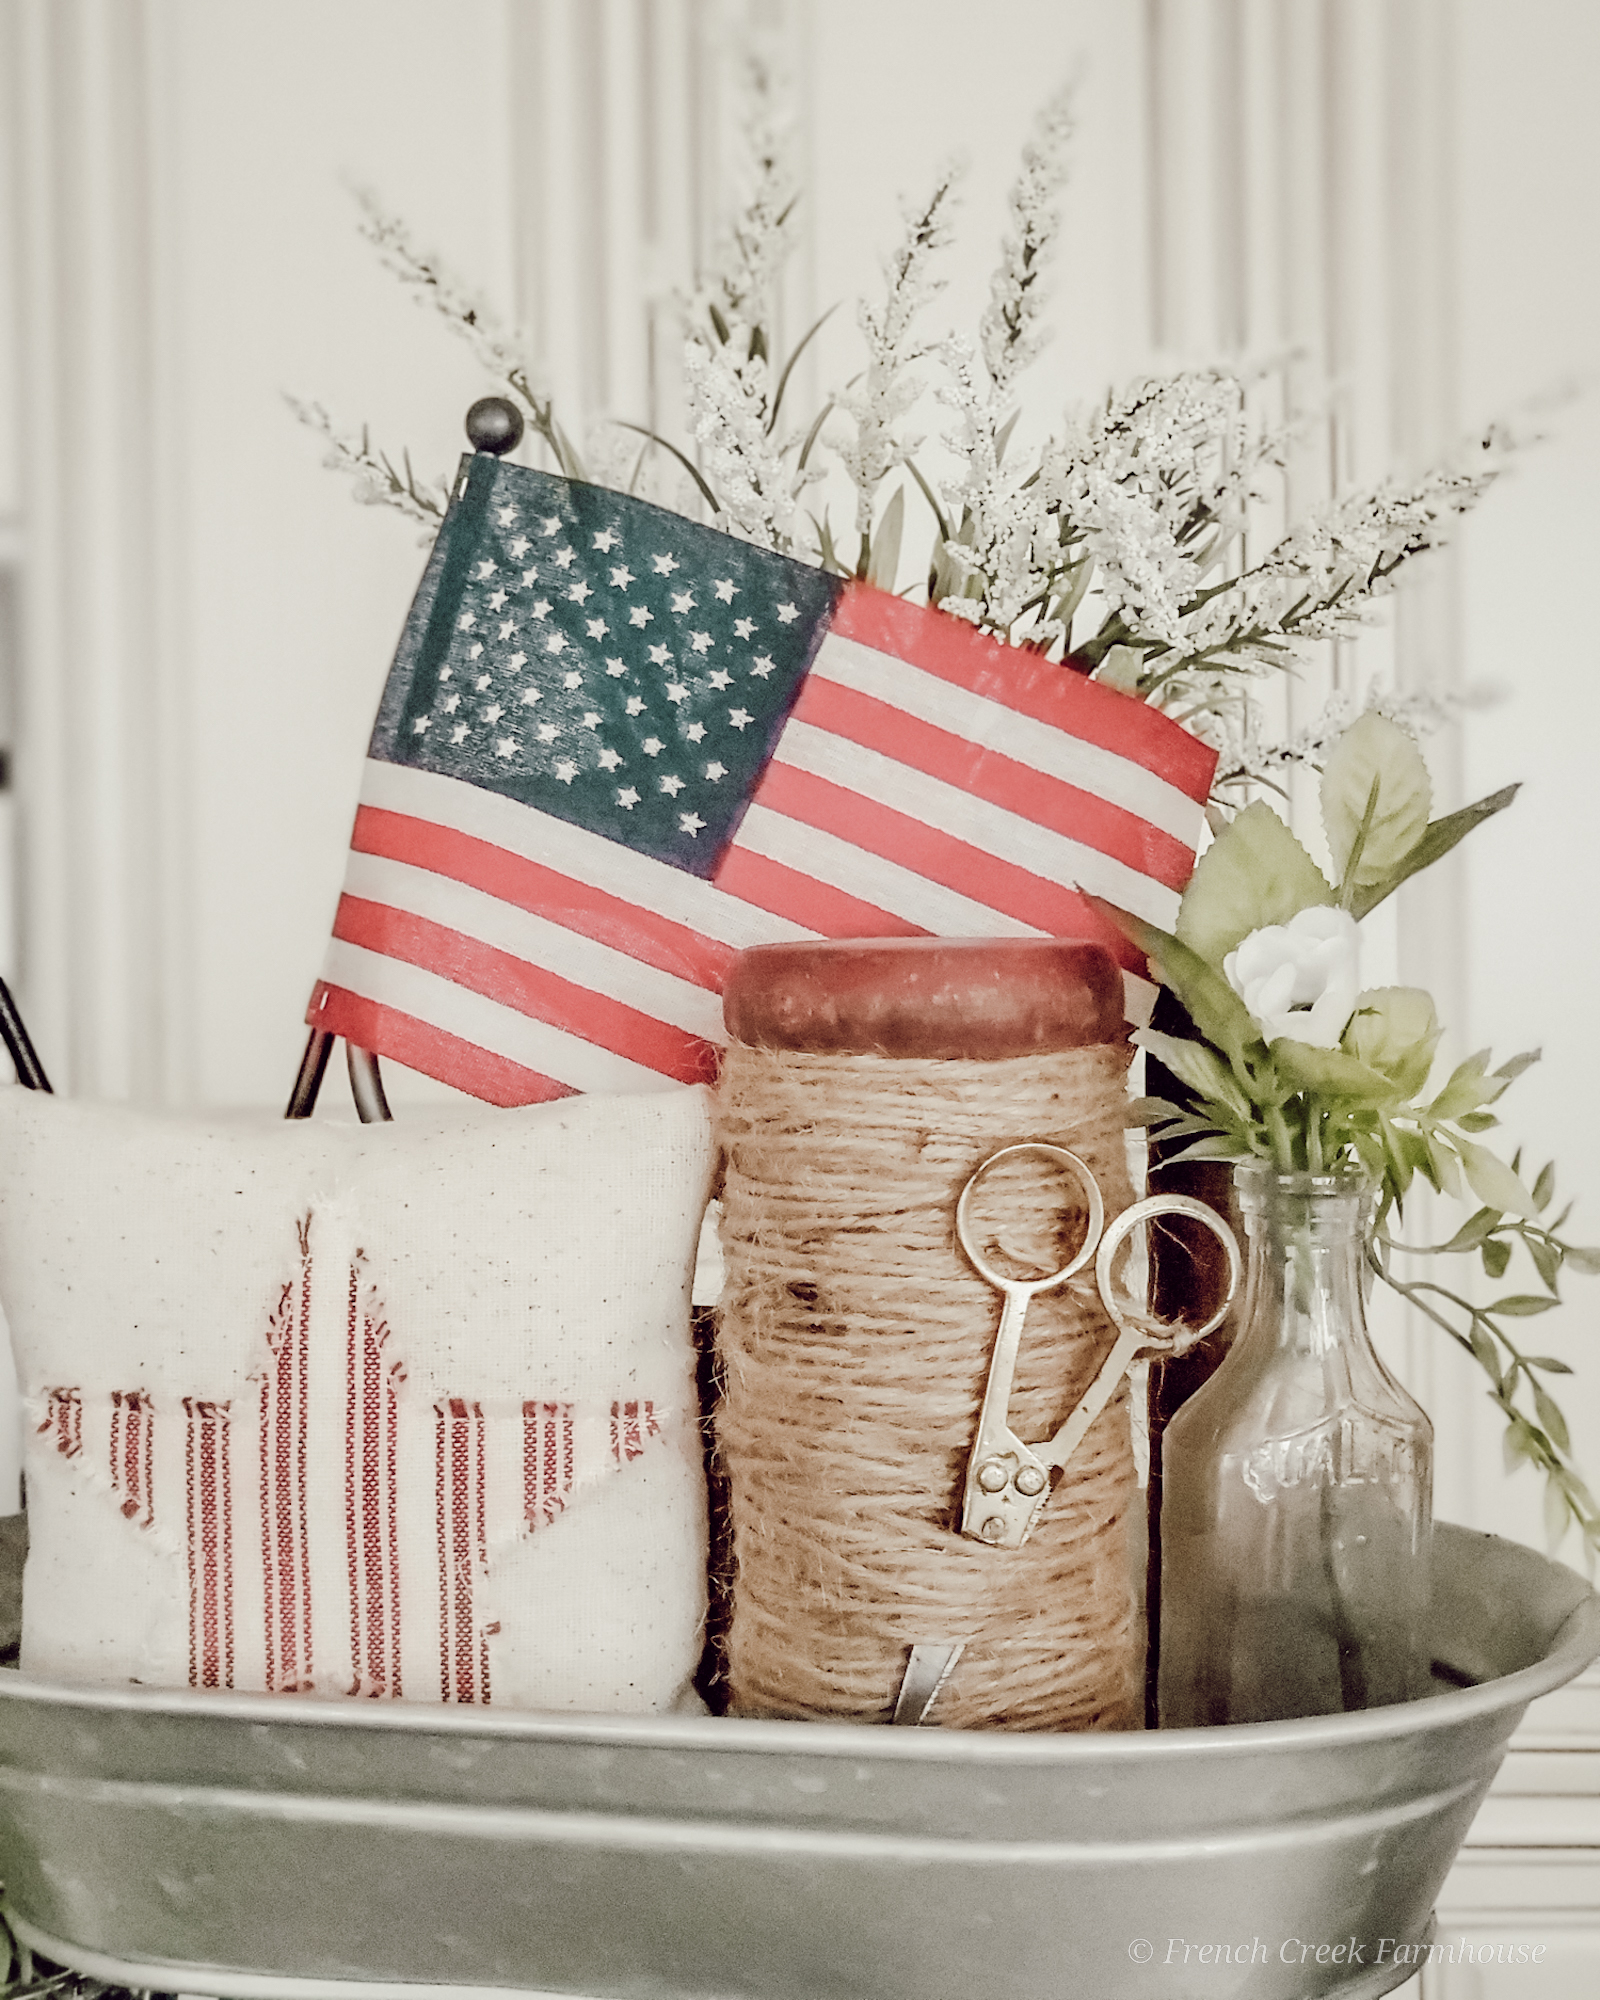 A vintage wooden spool and American flag decor